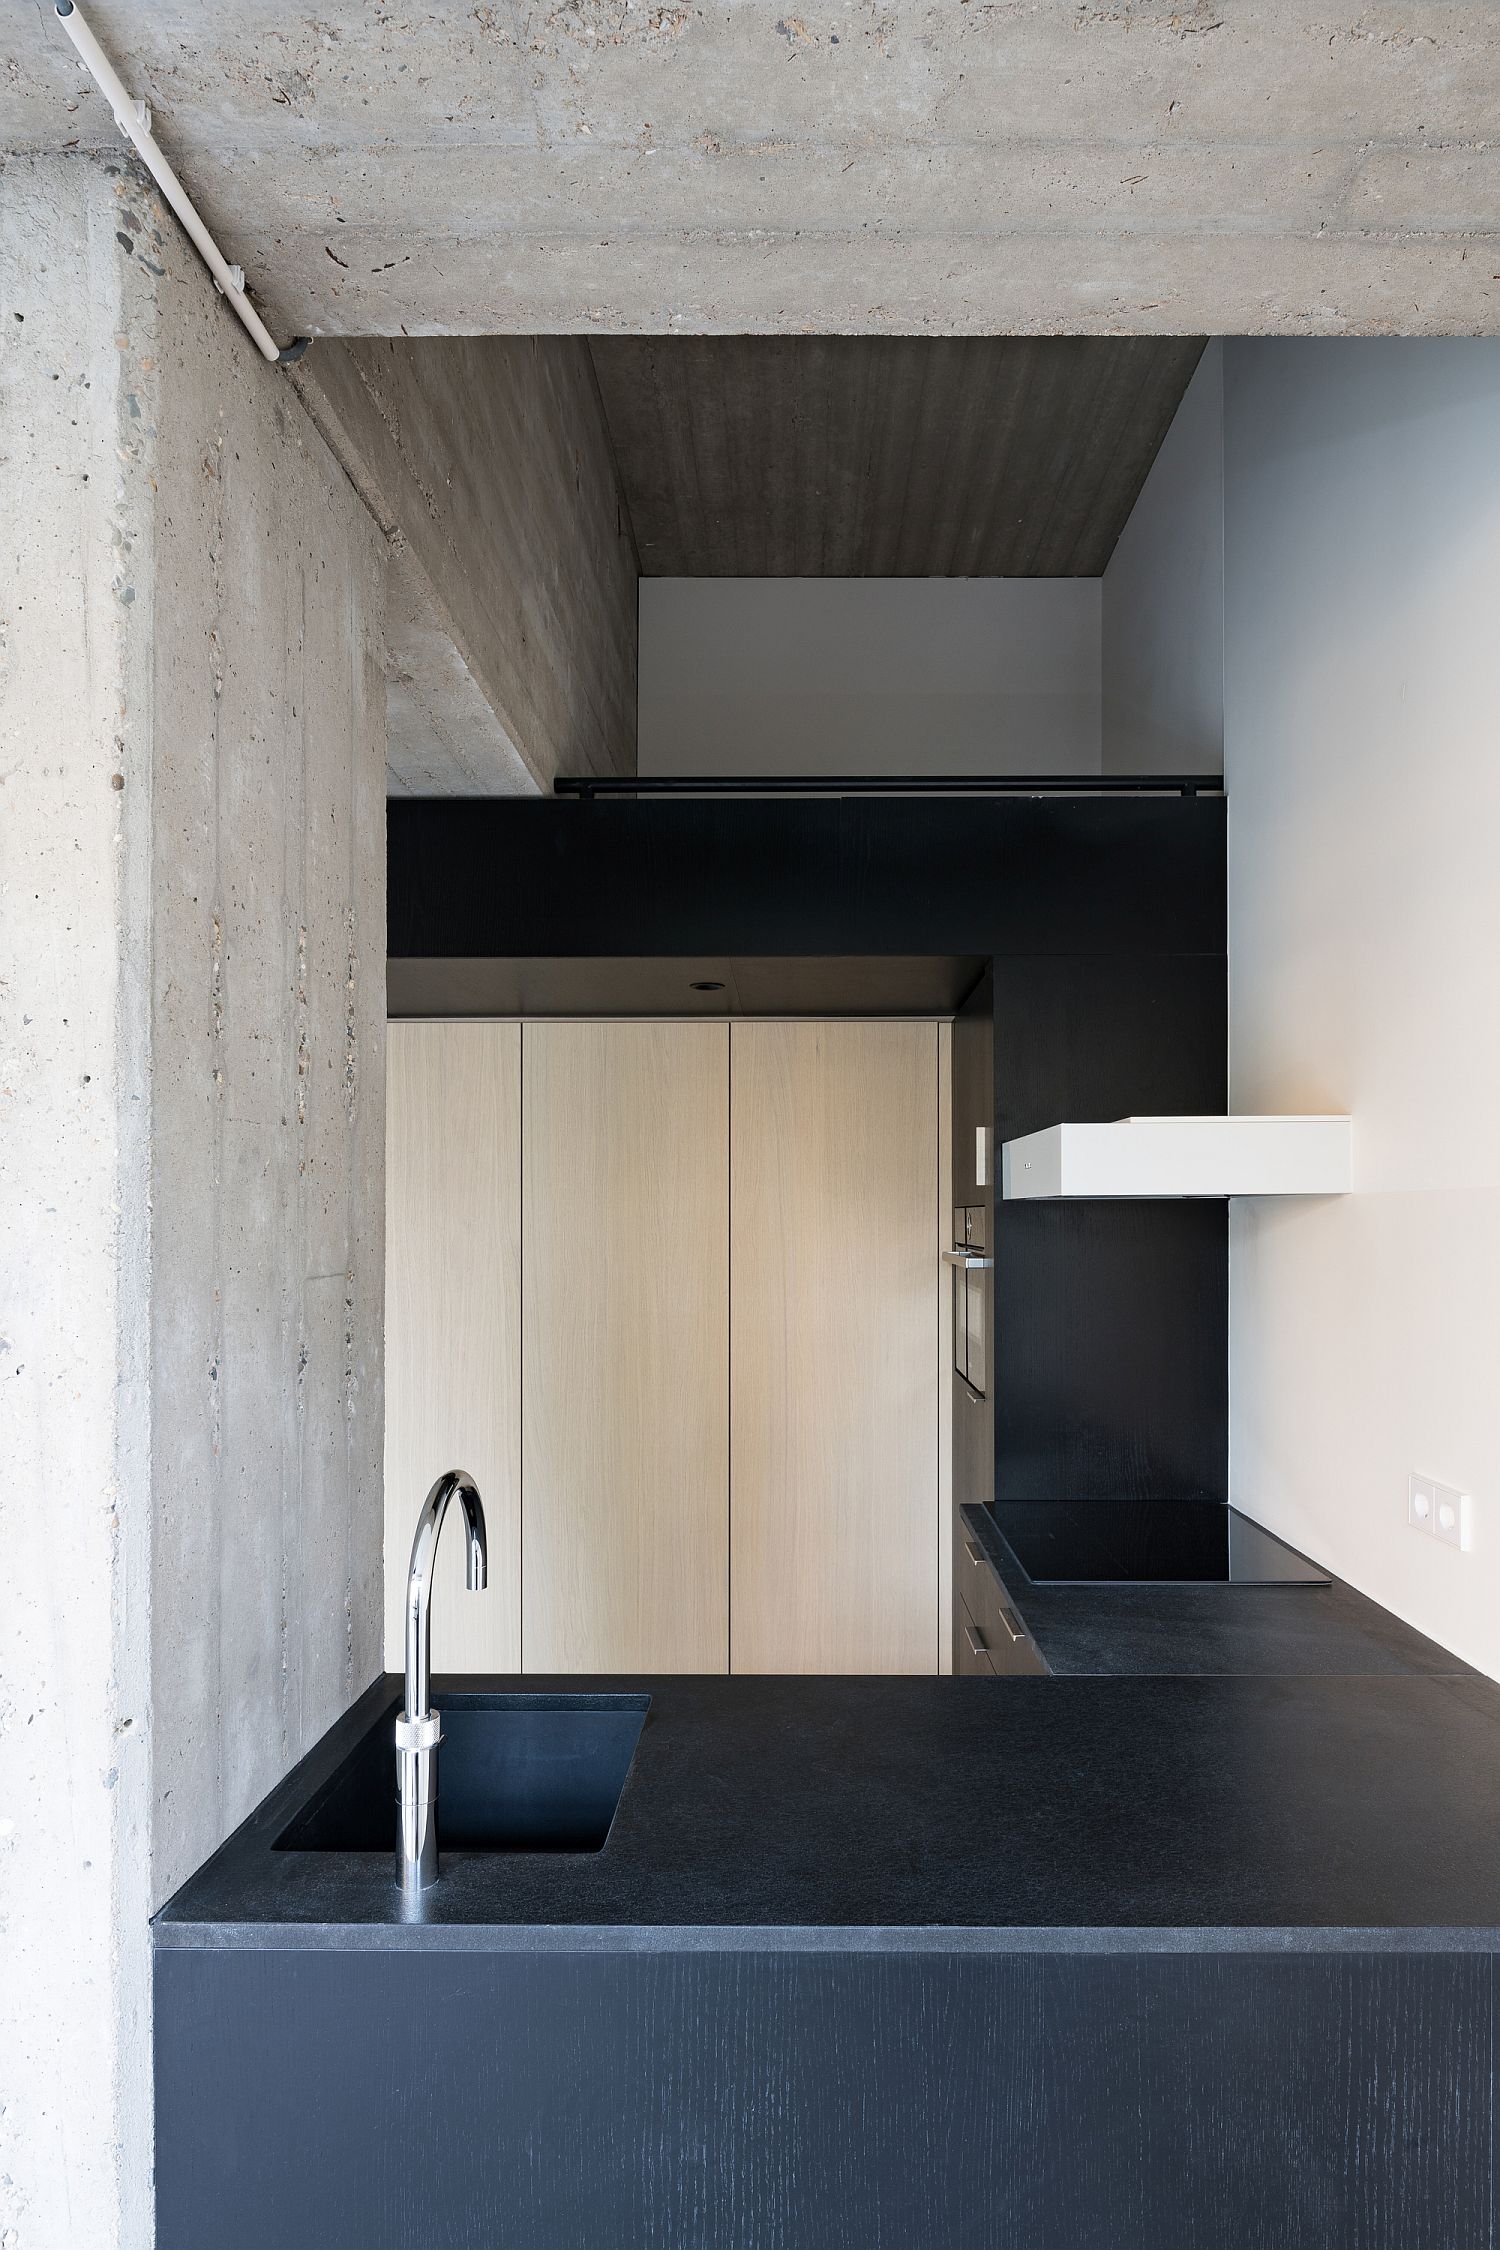 Black coupled with concrete in the kitchen